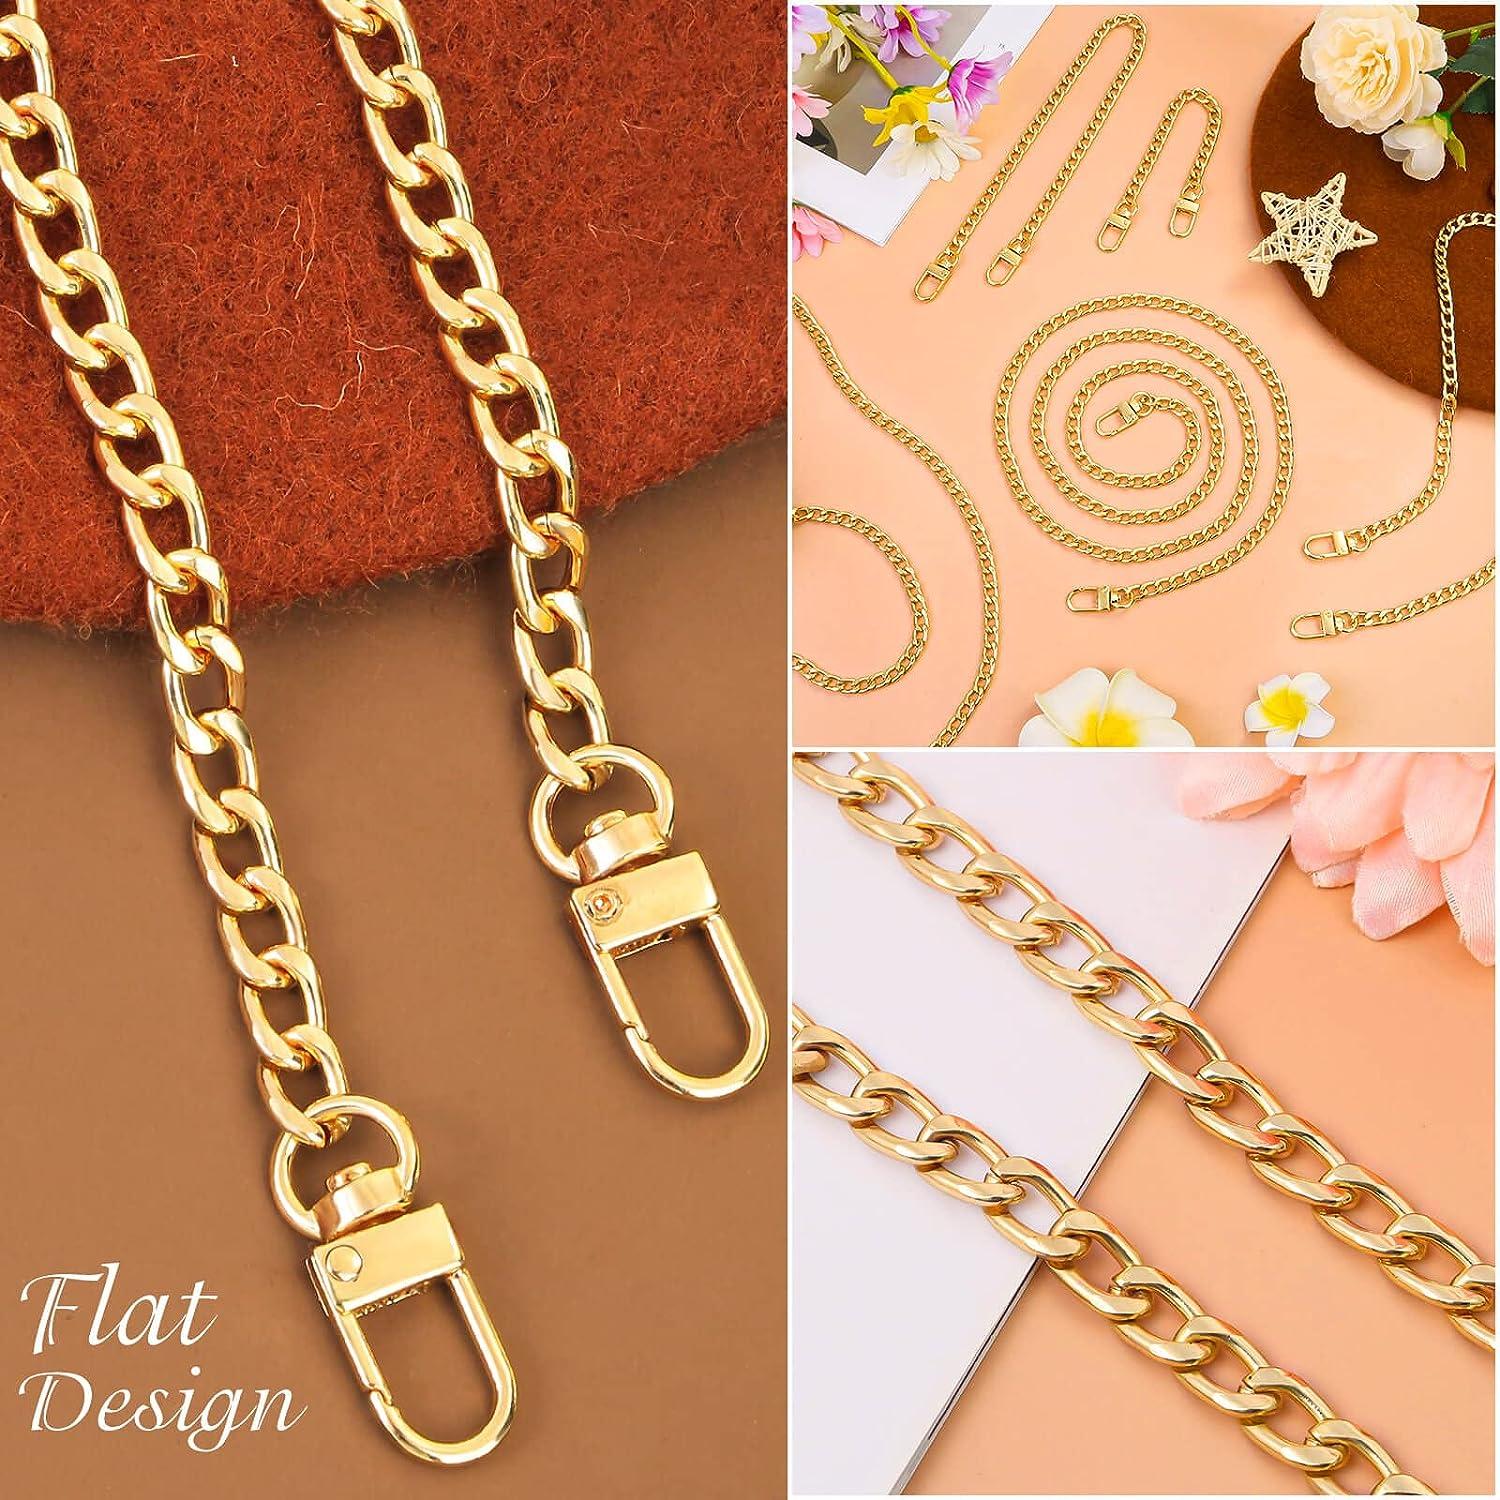 Gold Chain Strap Bag Chain Replacement Strap Purse Chain Bag Strap Bag  Handle Bag Hardware - Etsy UK